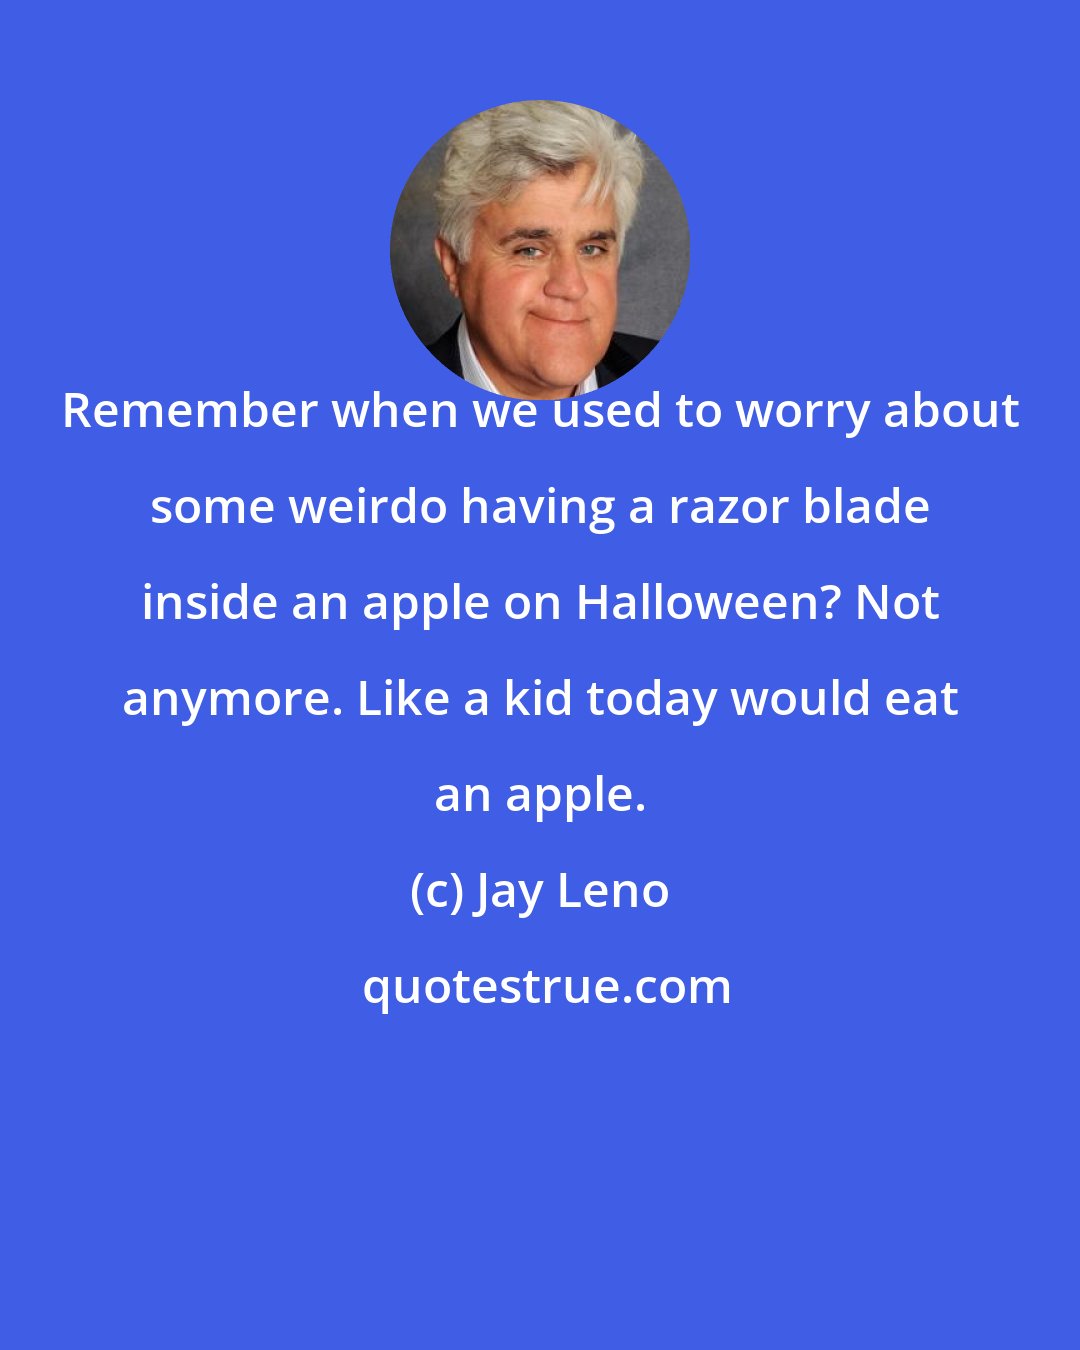 Jay Leno: Remember when we used to worry about some weirdo having a razor blade inside an apple on Halloween? Not anymore. Like a kid today would eat an apple.